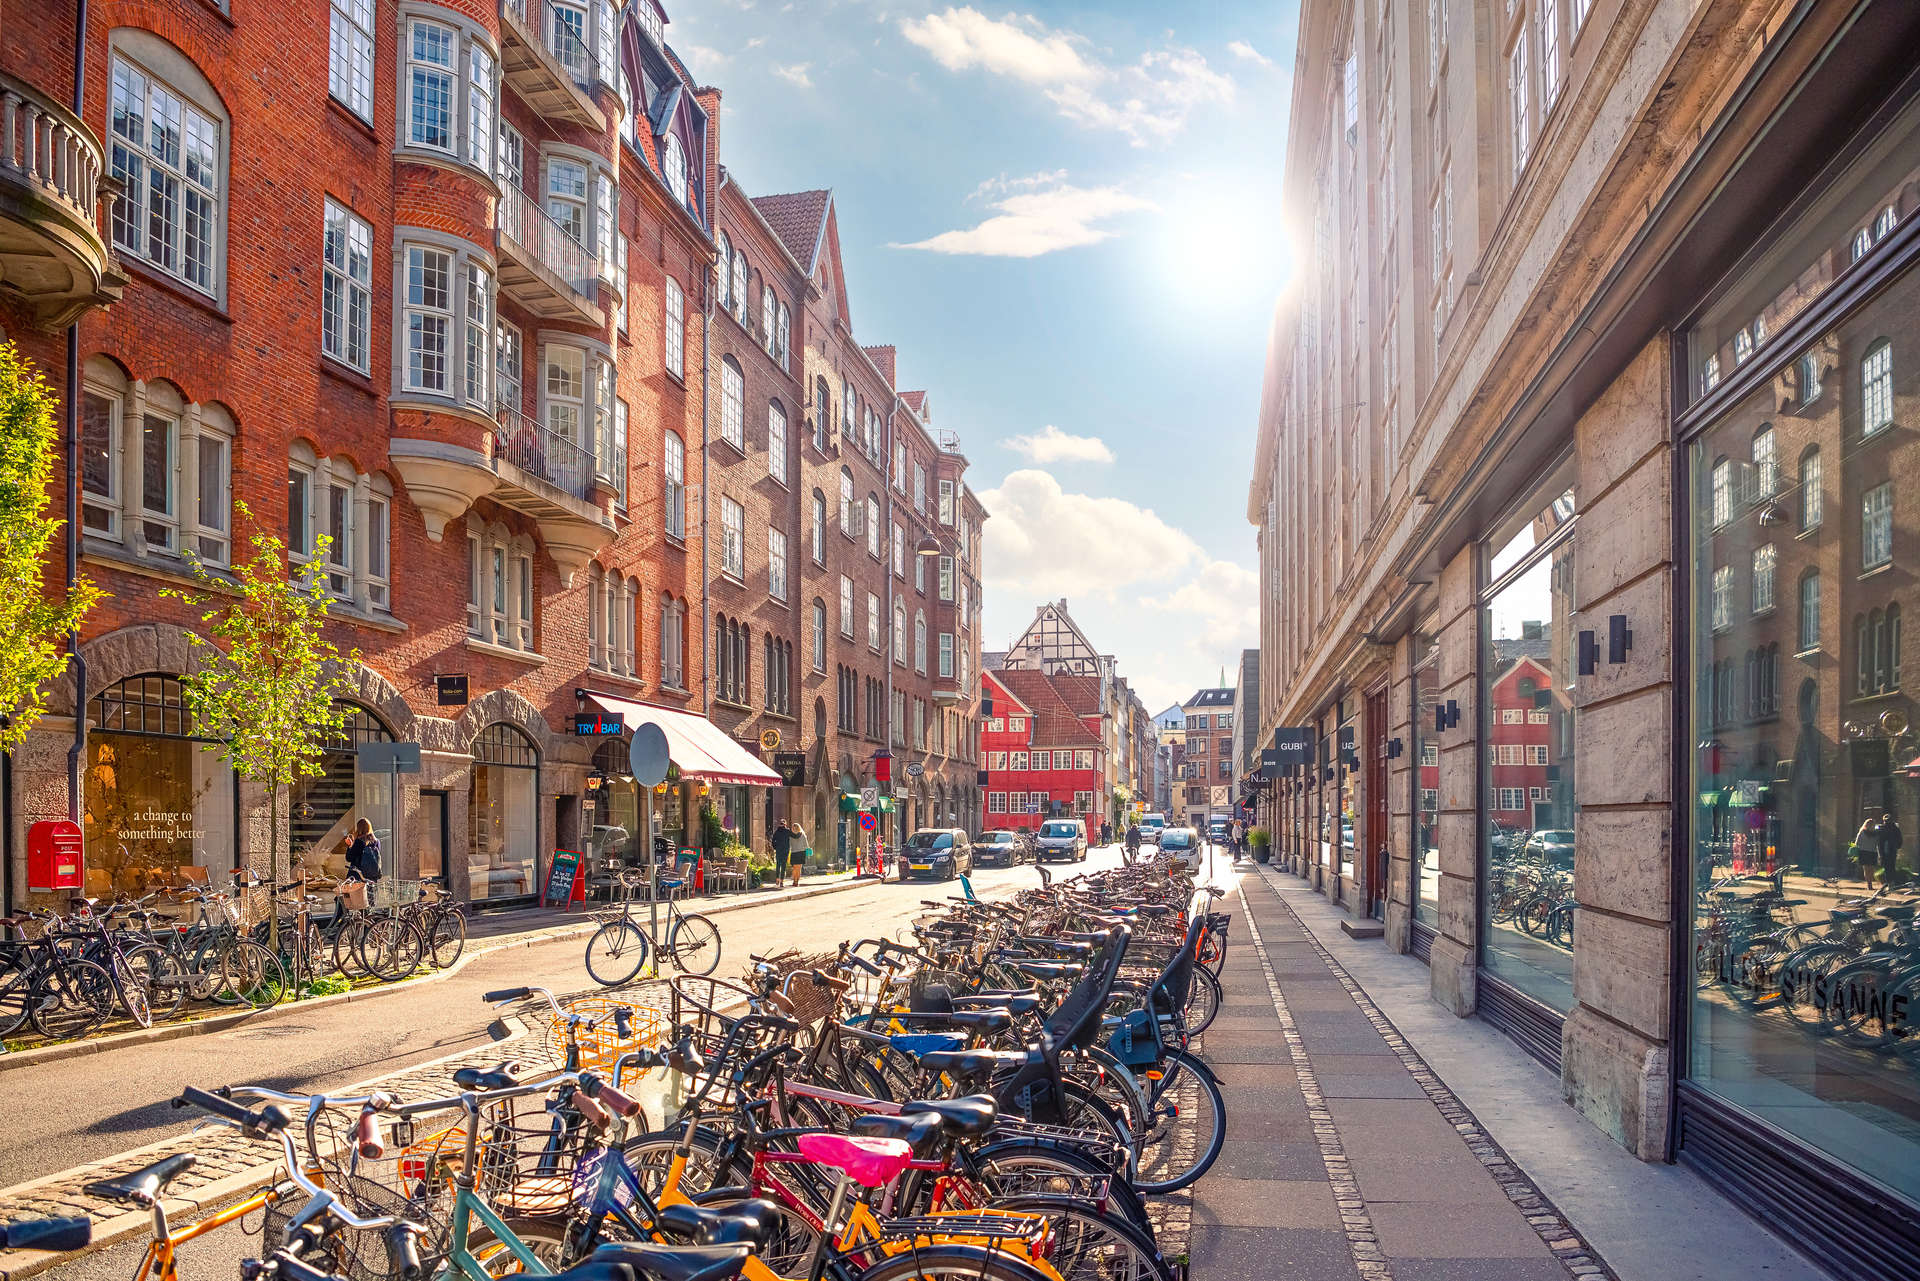 Start your tour of Denmark with an exploration of the country's charming capital Copenhagen